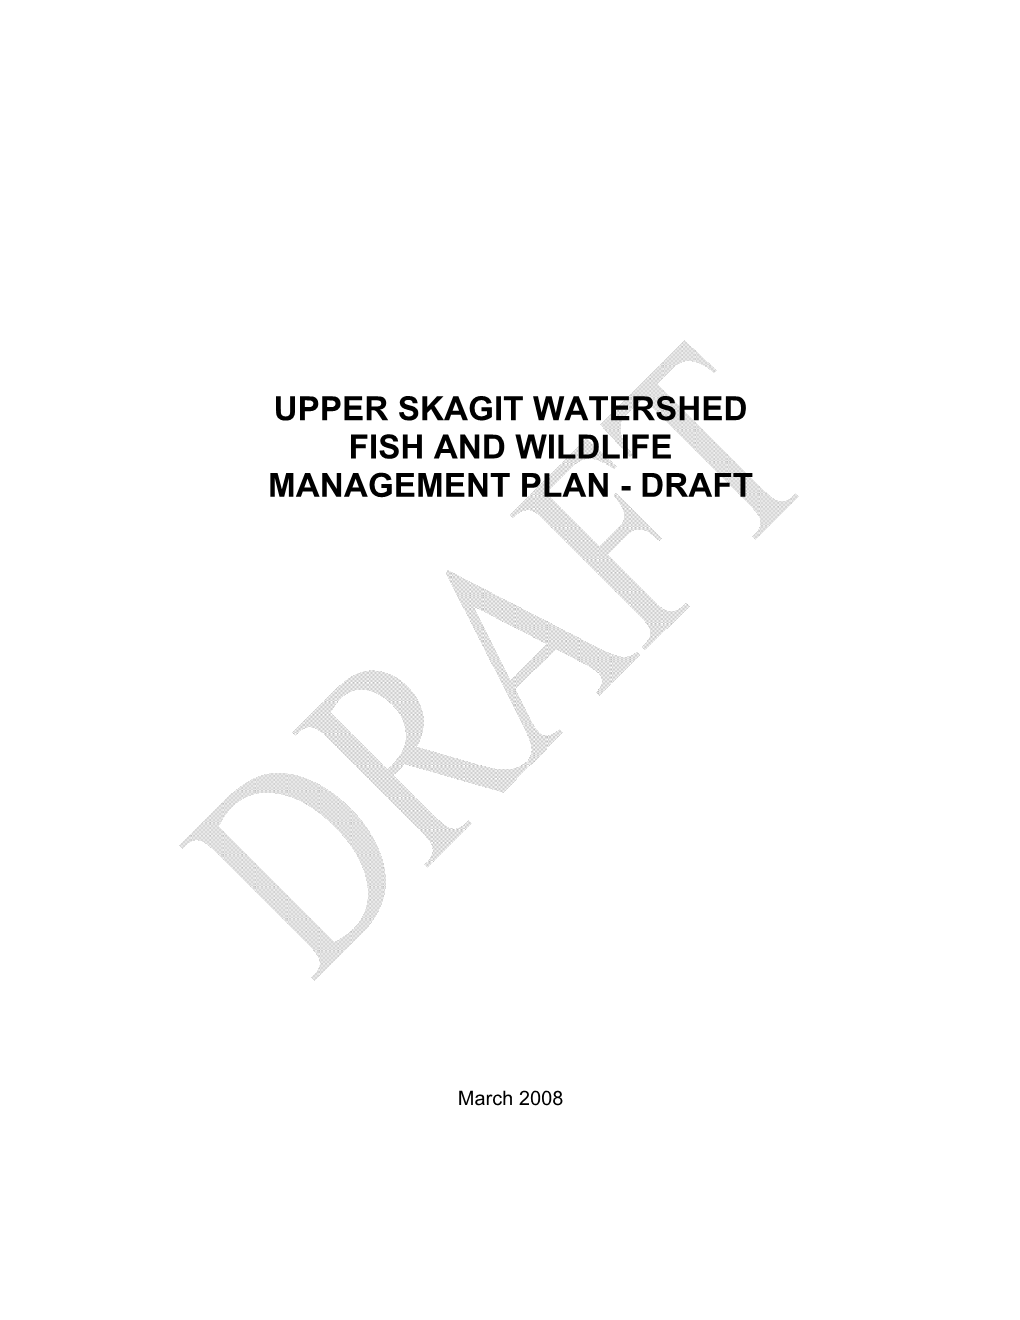 Upper Skagit Watershed Fish and Wildlife Management Plan DRAFT